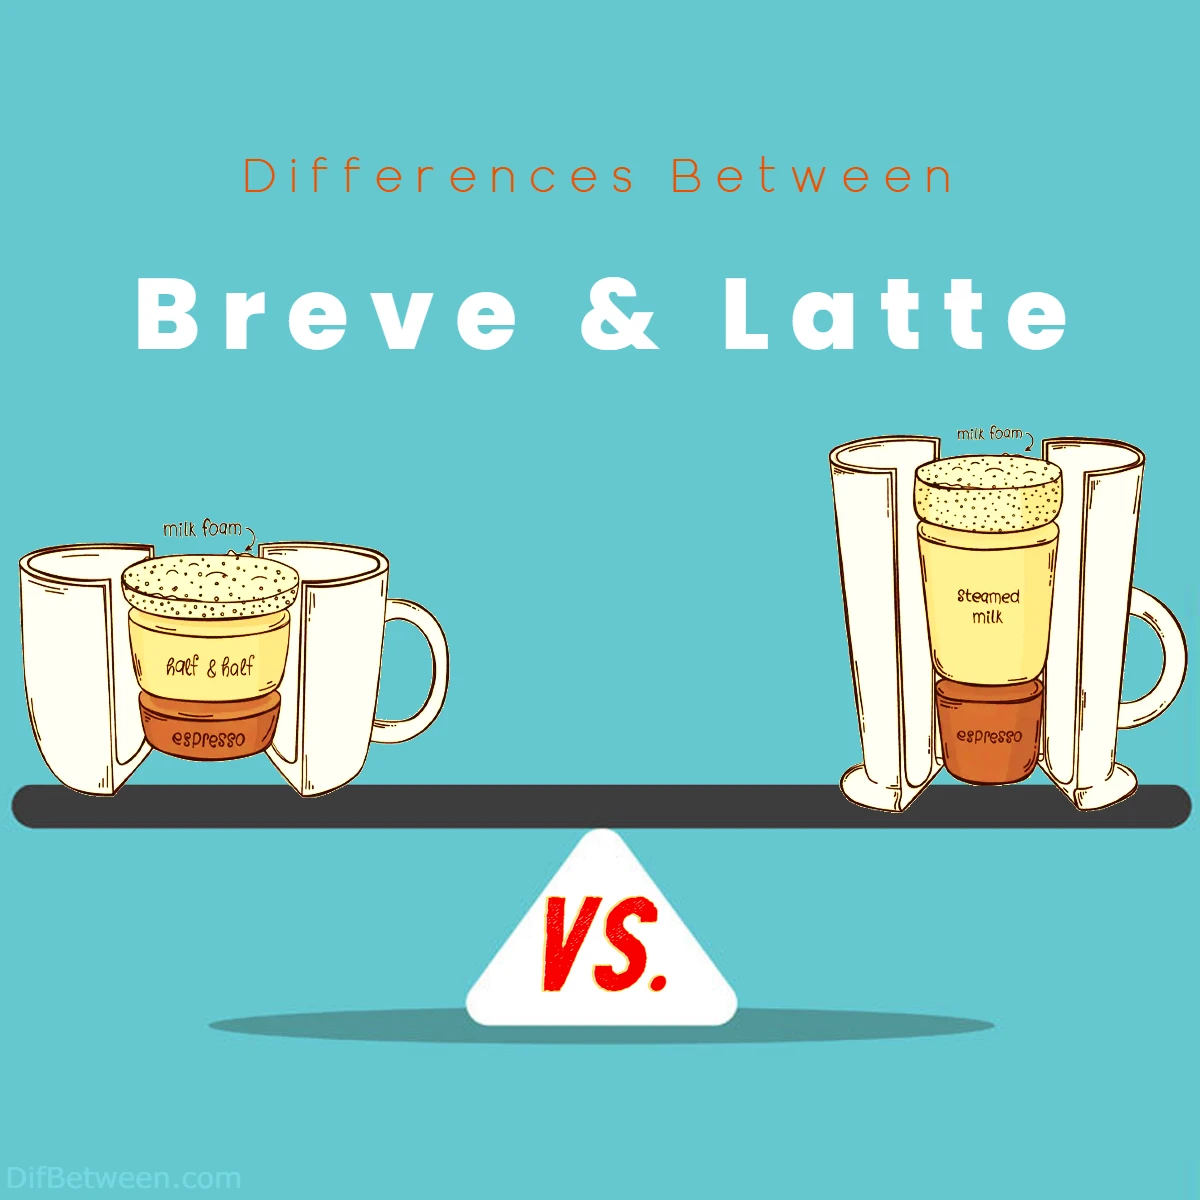 Differences Between Latte and Breve